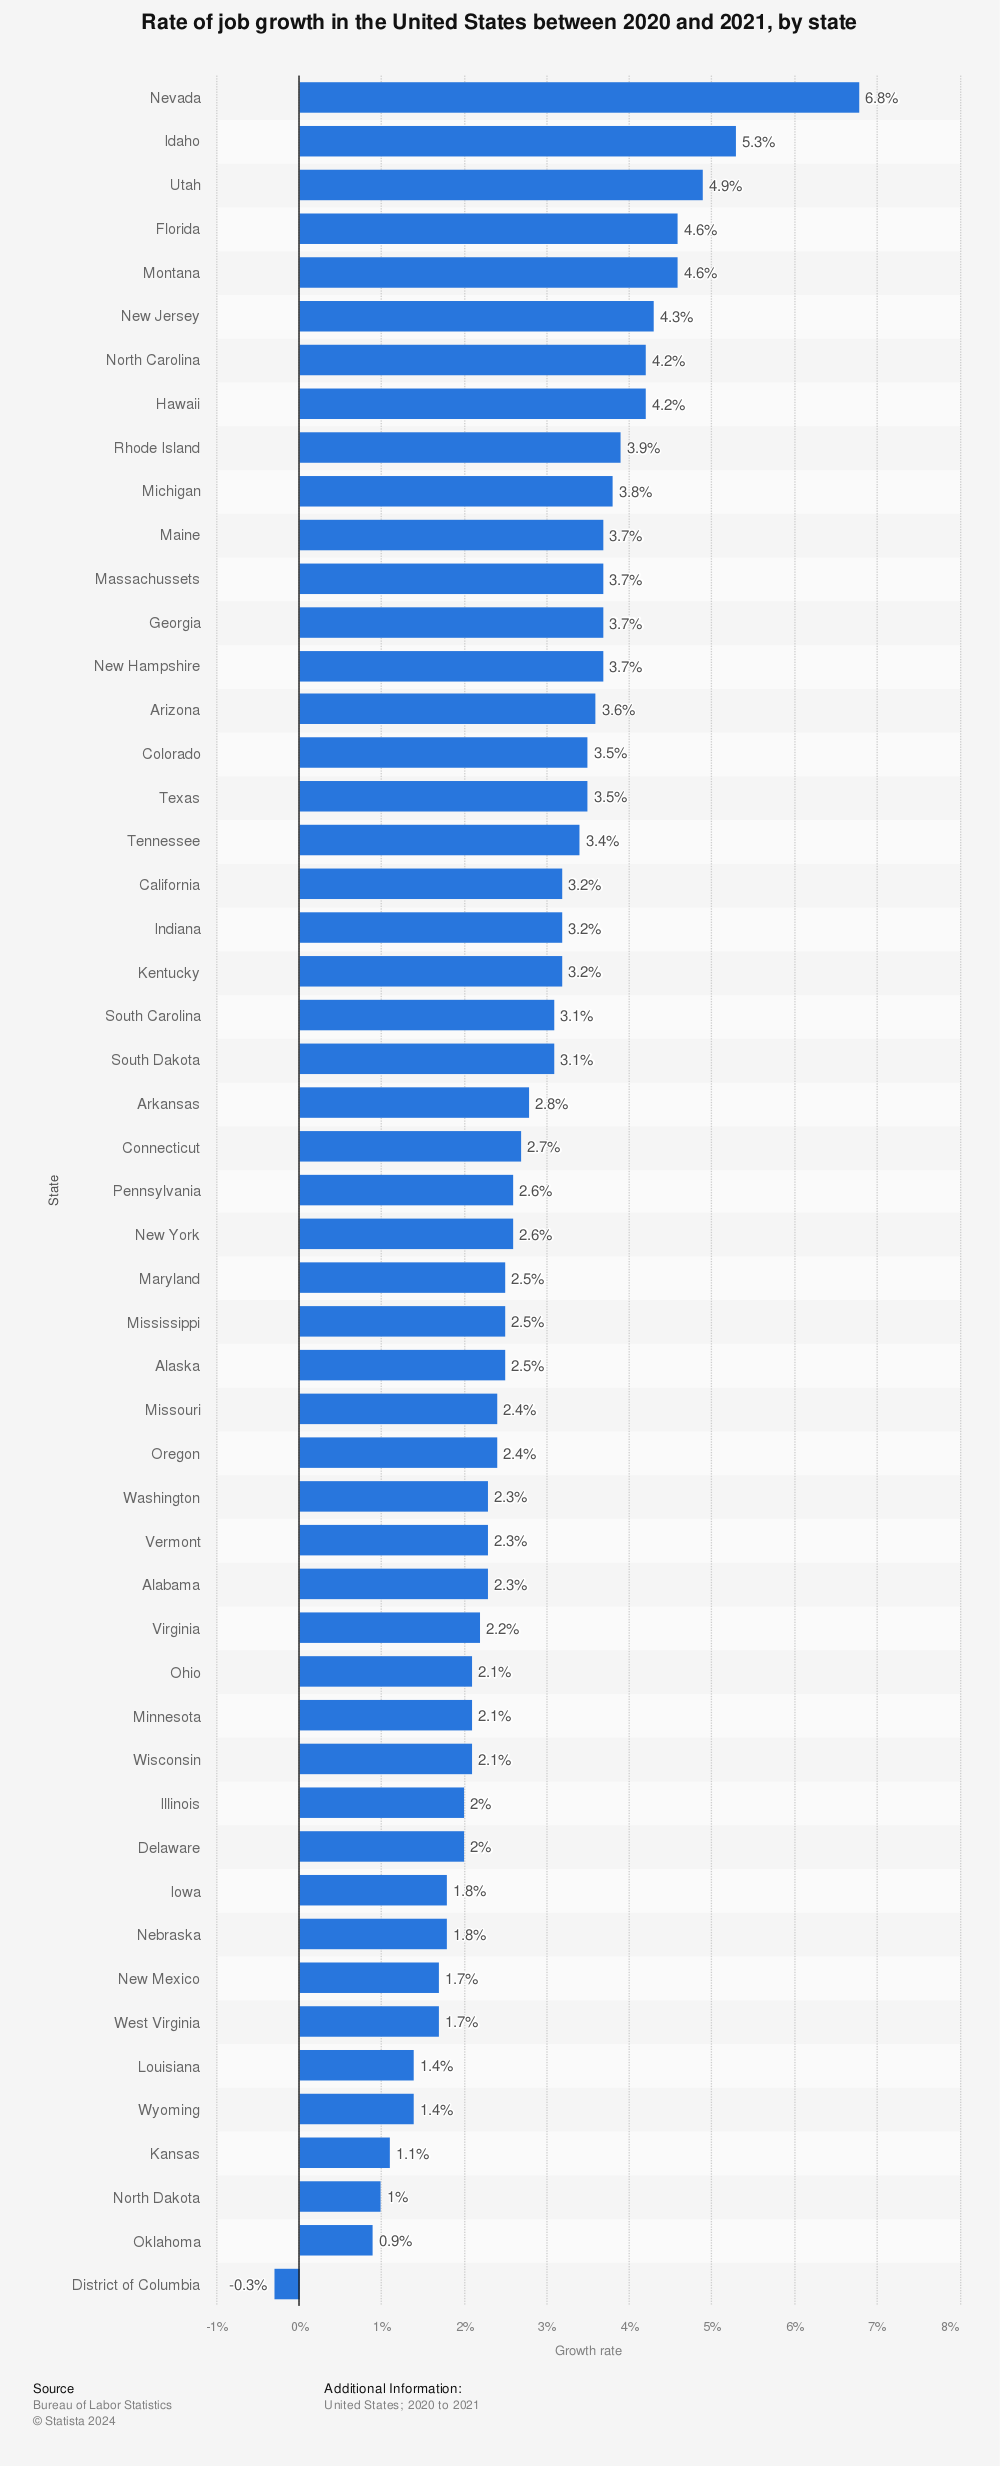 Statistic: Rate of job growth in the United States between 2020 and 2021, by state | Statista